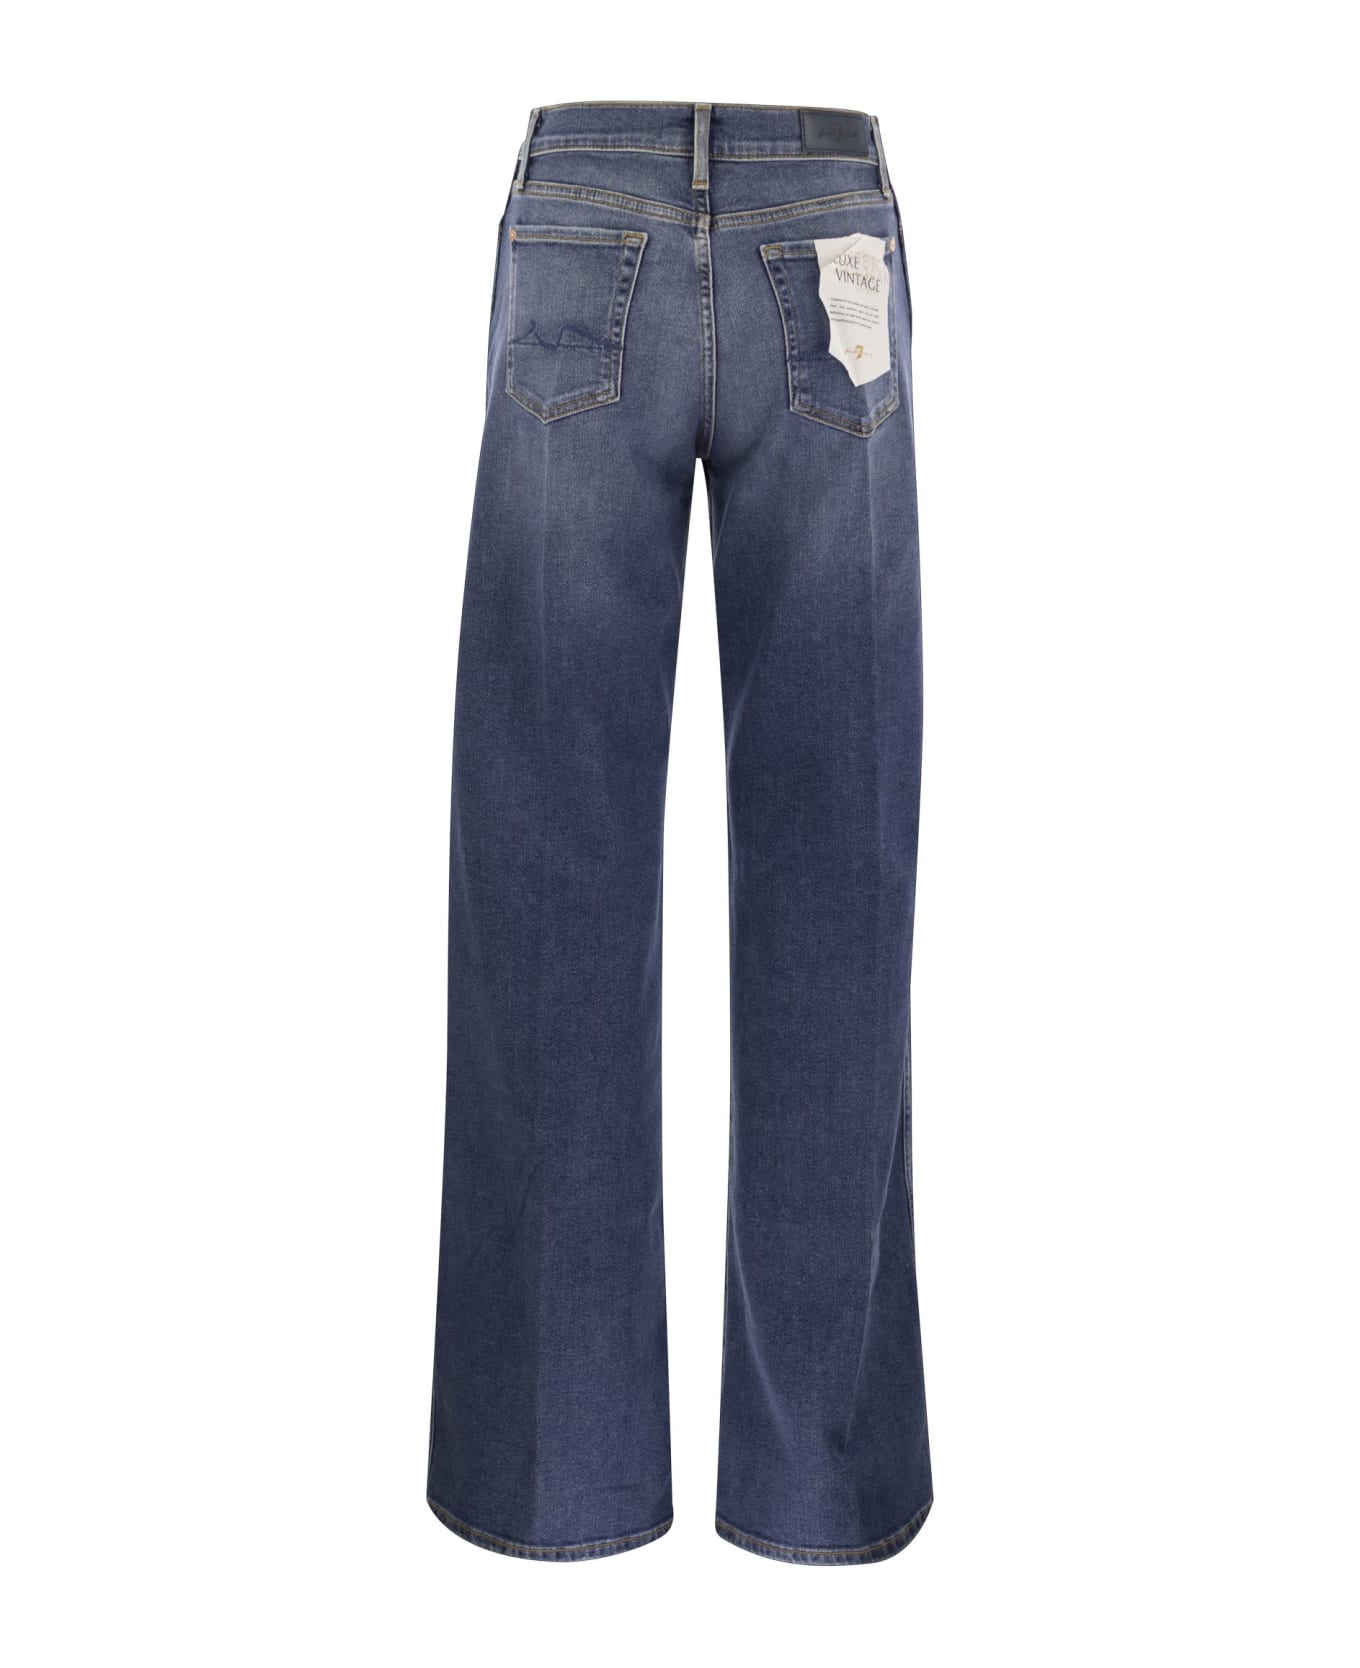 7 For All Mankind Lotta Luxe Vintage - High Waisted Jeans - Blue